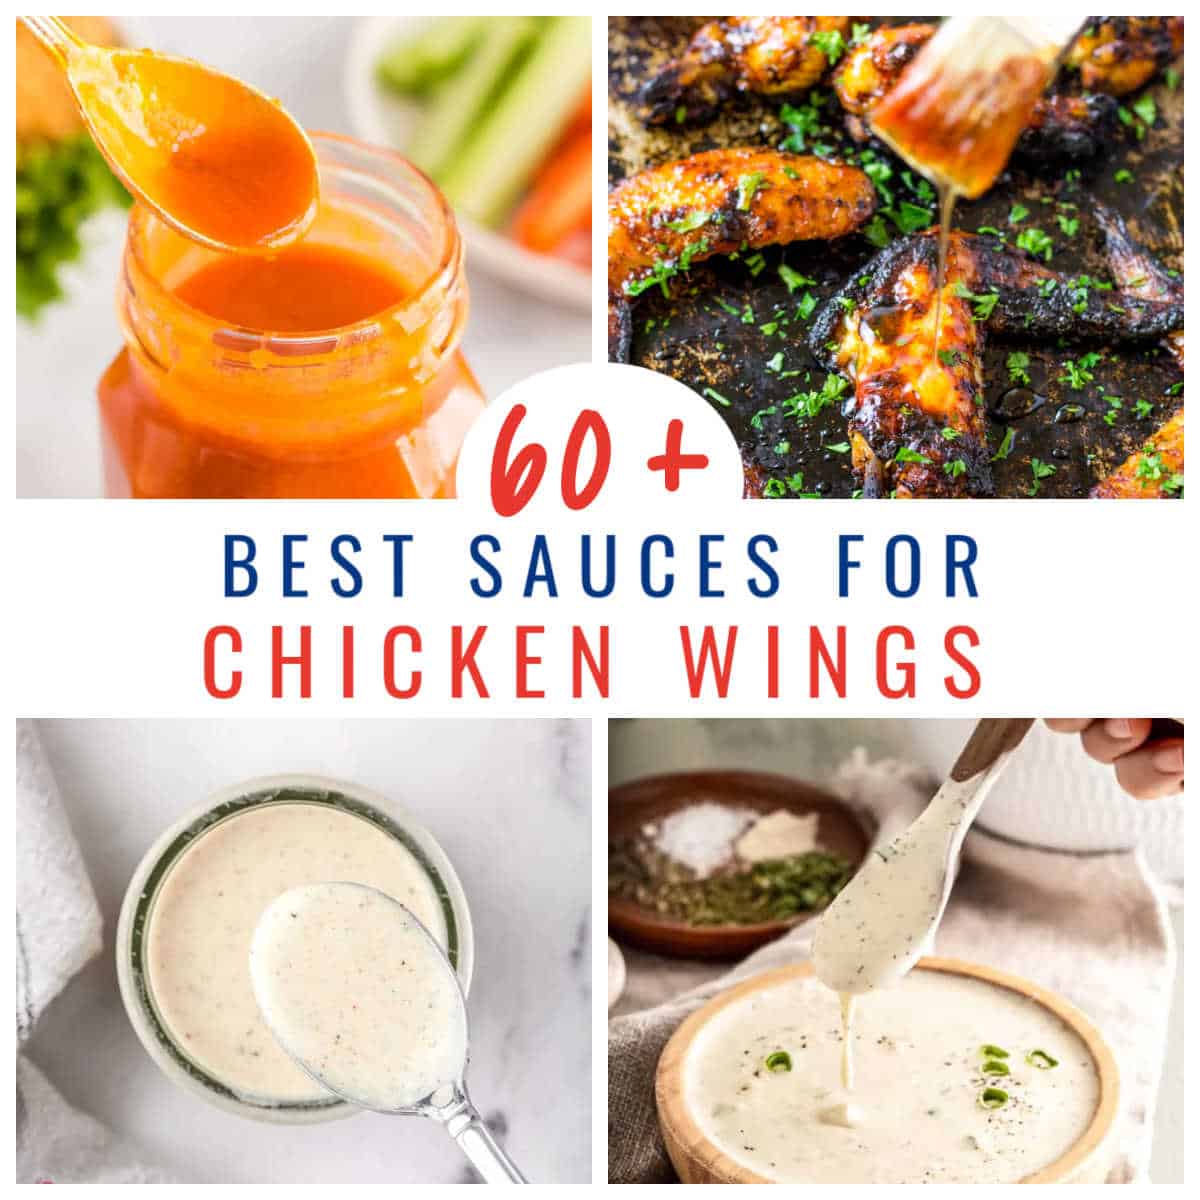 collage of sauces with text "60+"